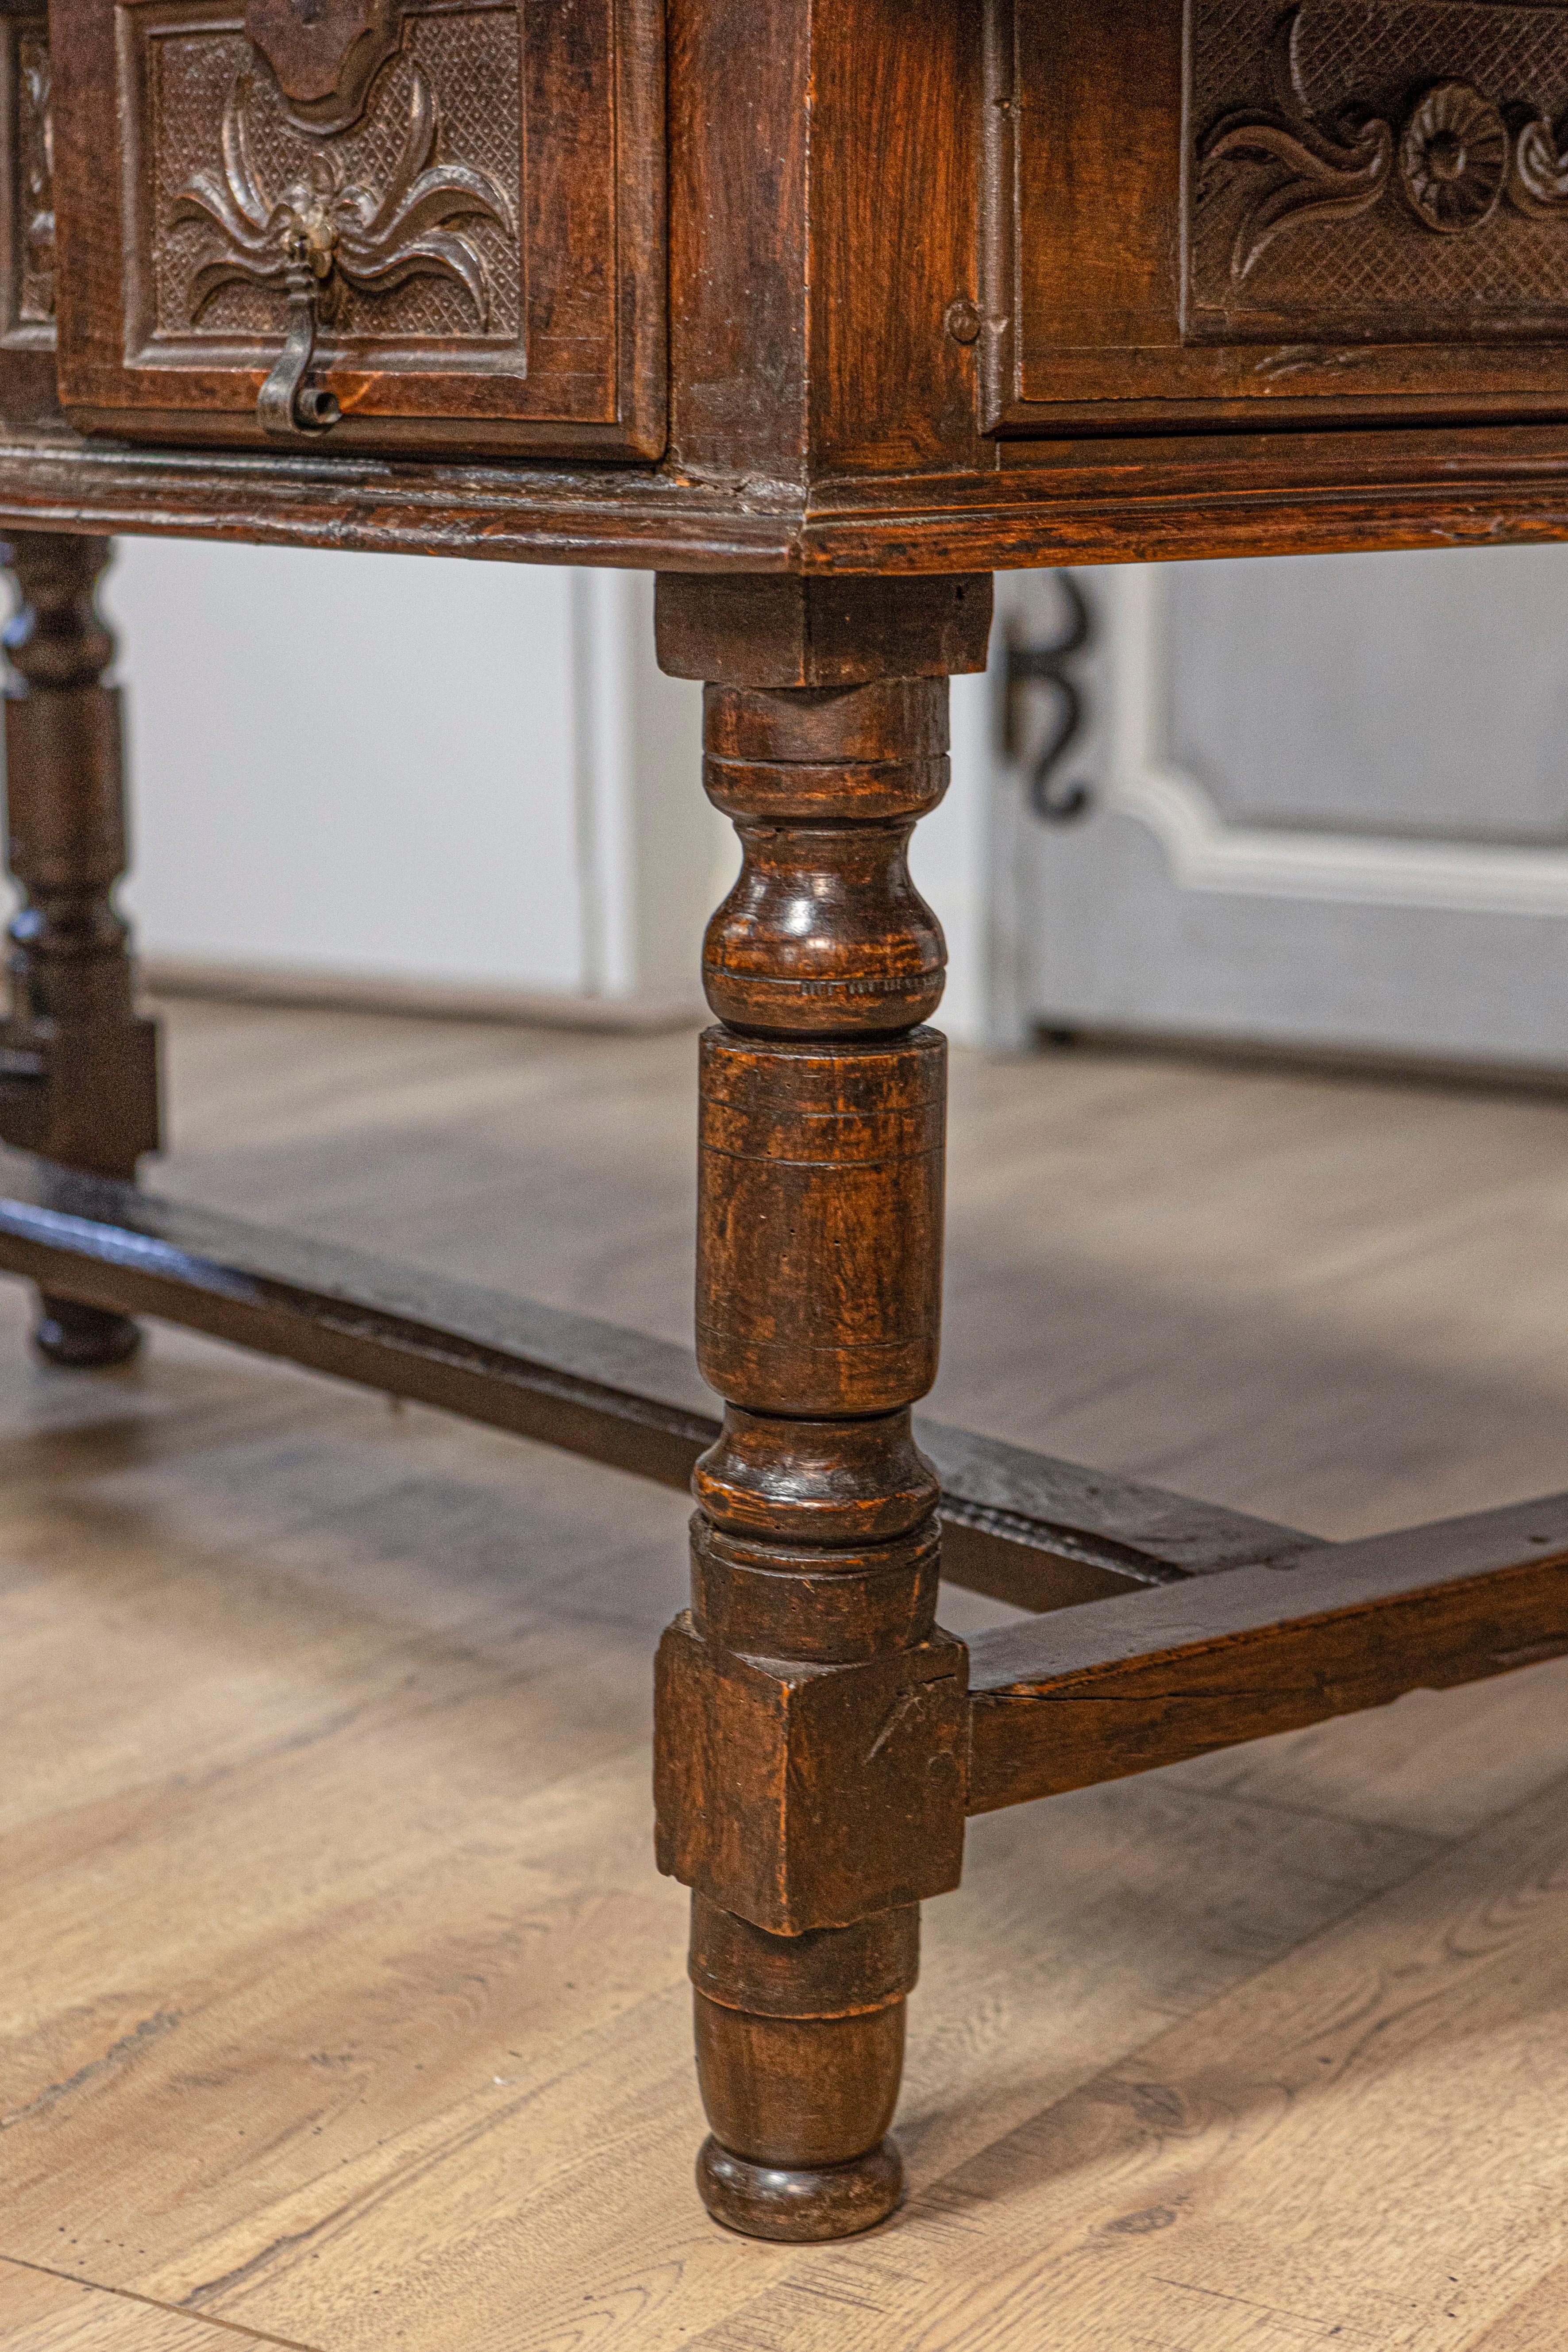 Spanish Baroque 17th Century Walnut Table with Carved Drawers and Turned Legs For Sale 7